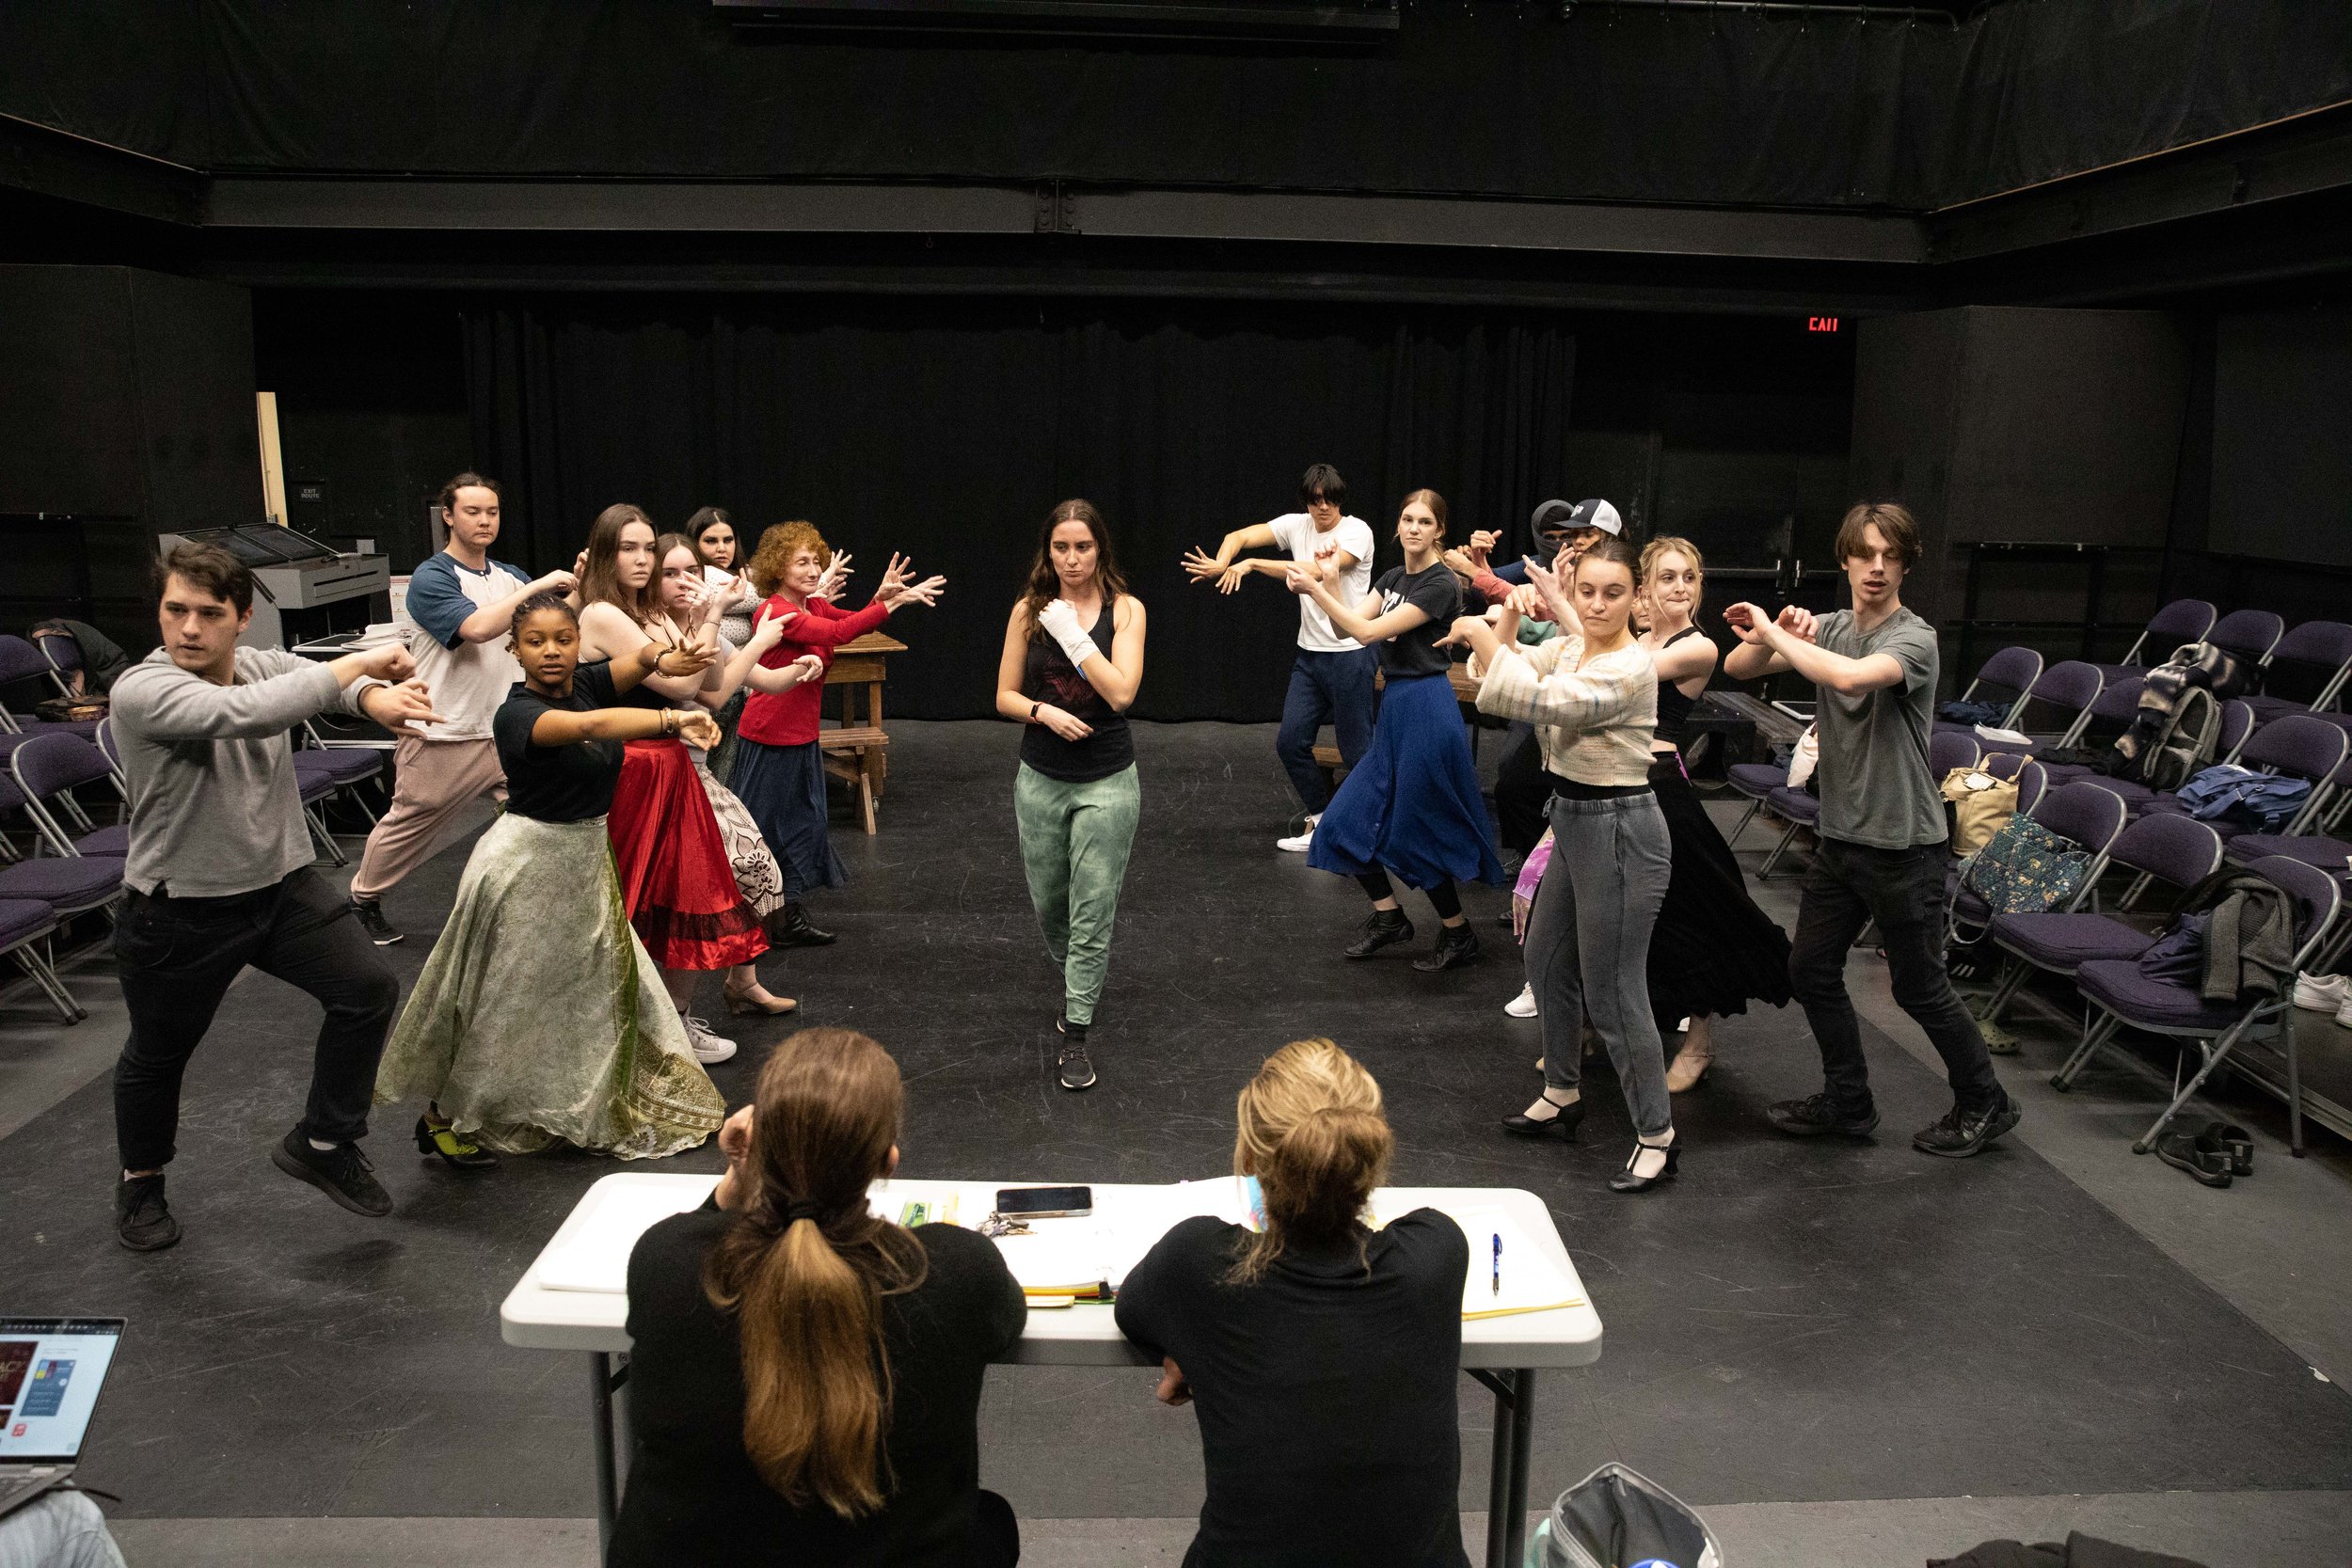  SMC student Talya Sindel (center) performing along her classmates in front of Instructors Perviz Sawoski (left) and Cihtli Ocampo (right) at a class rehearsal for the musical “Hunchback of Notredame”. She plays the role of Esmeralda in the play. The